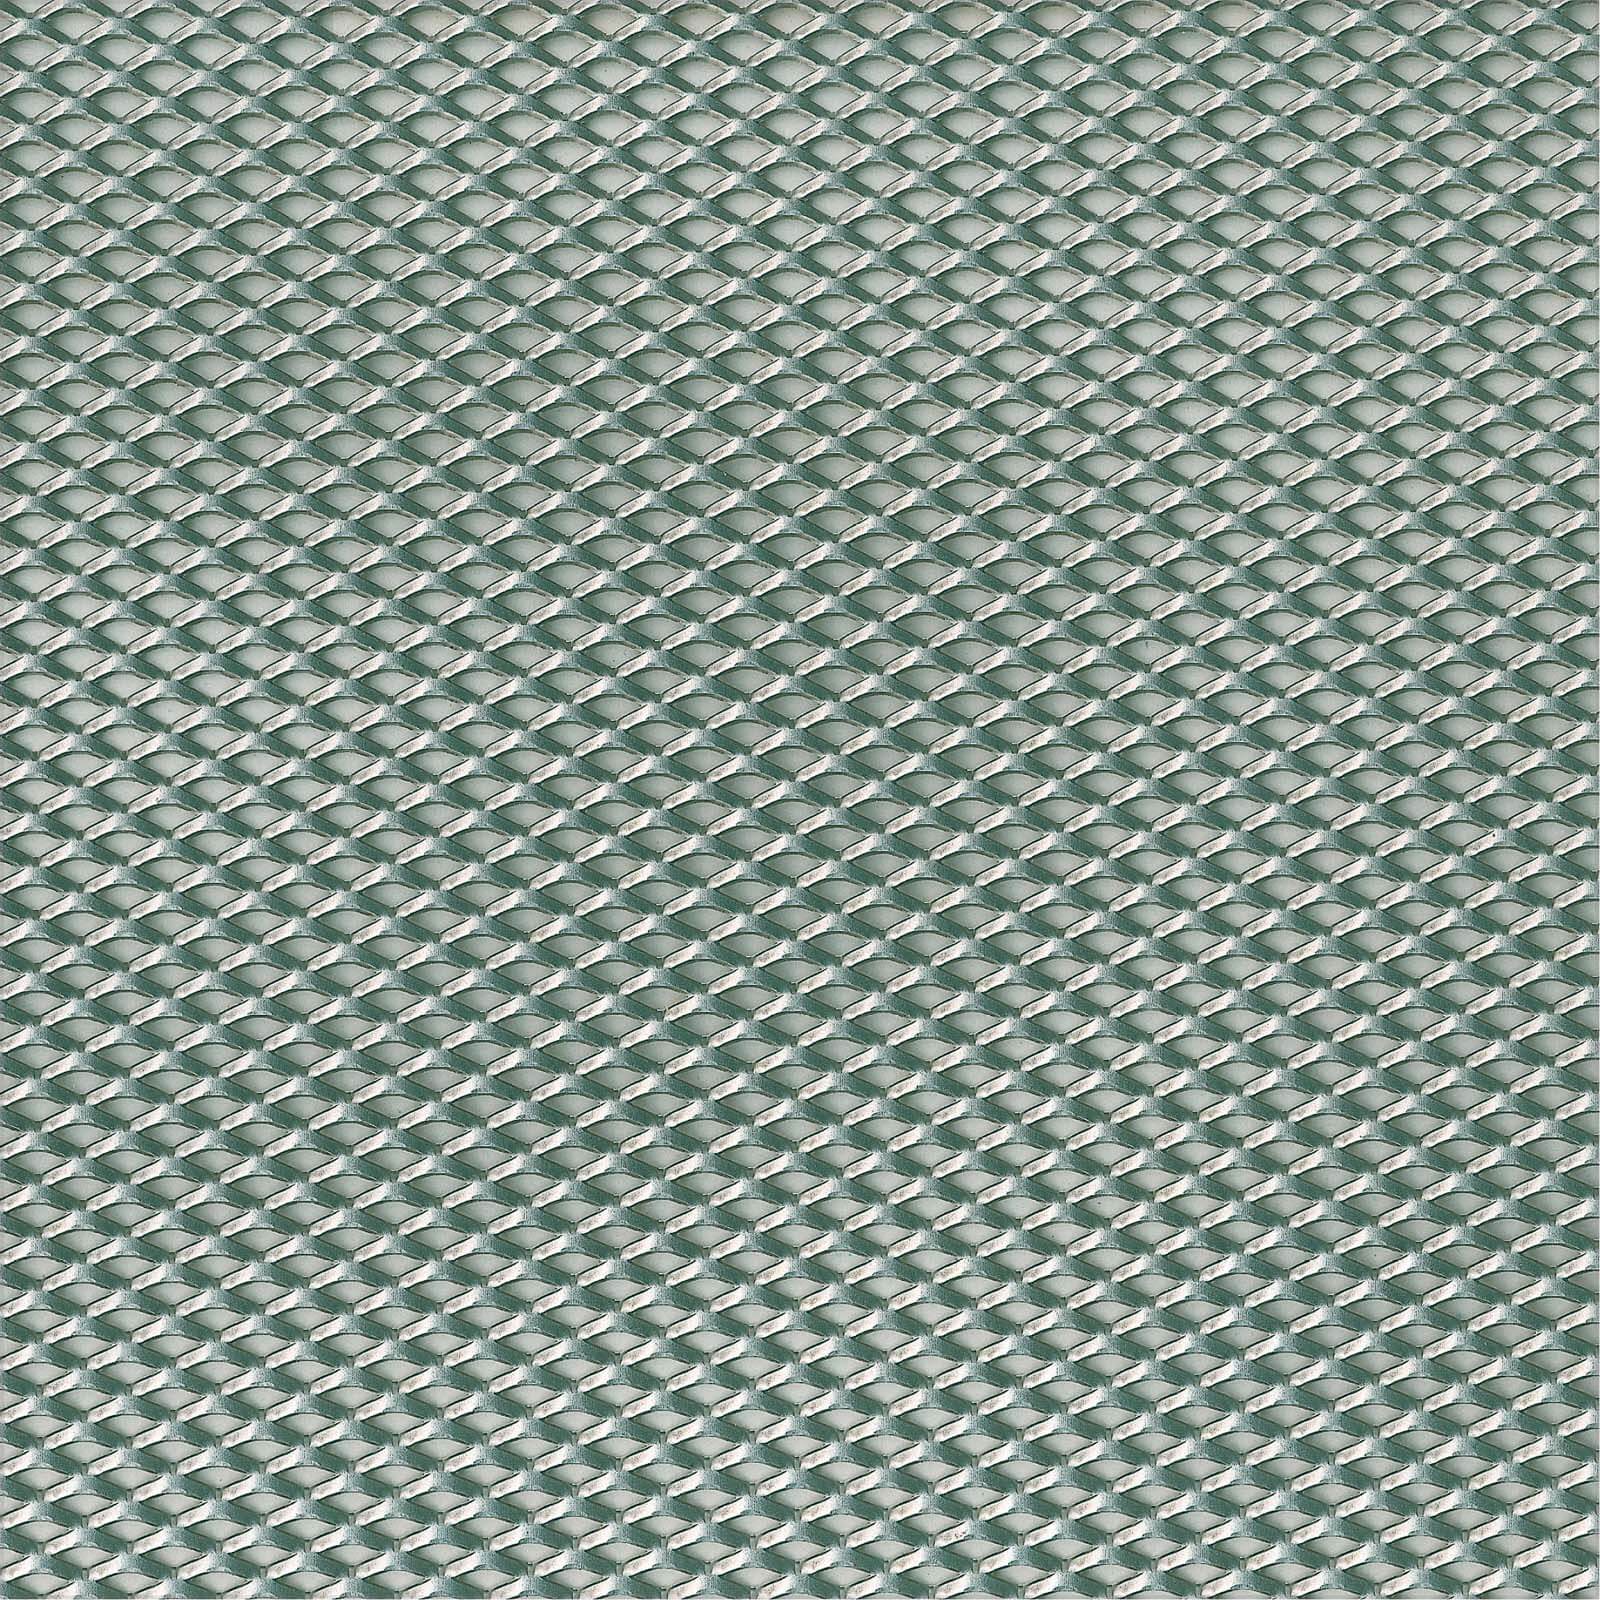 Perforated Steel Sheet - 300 x 1000 x 1.2mm